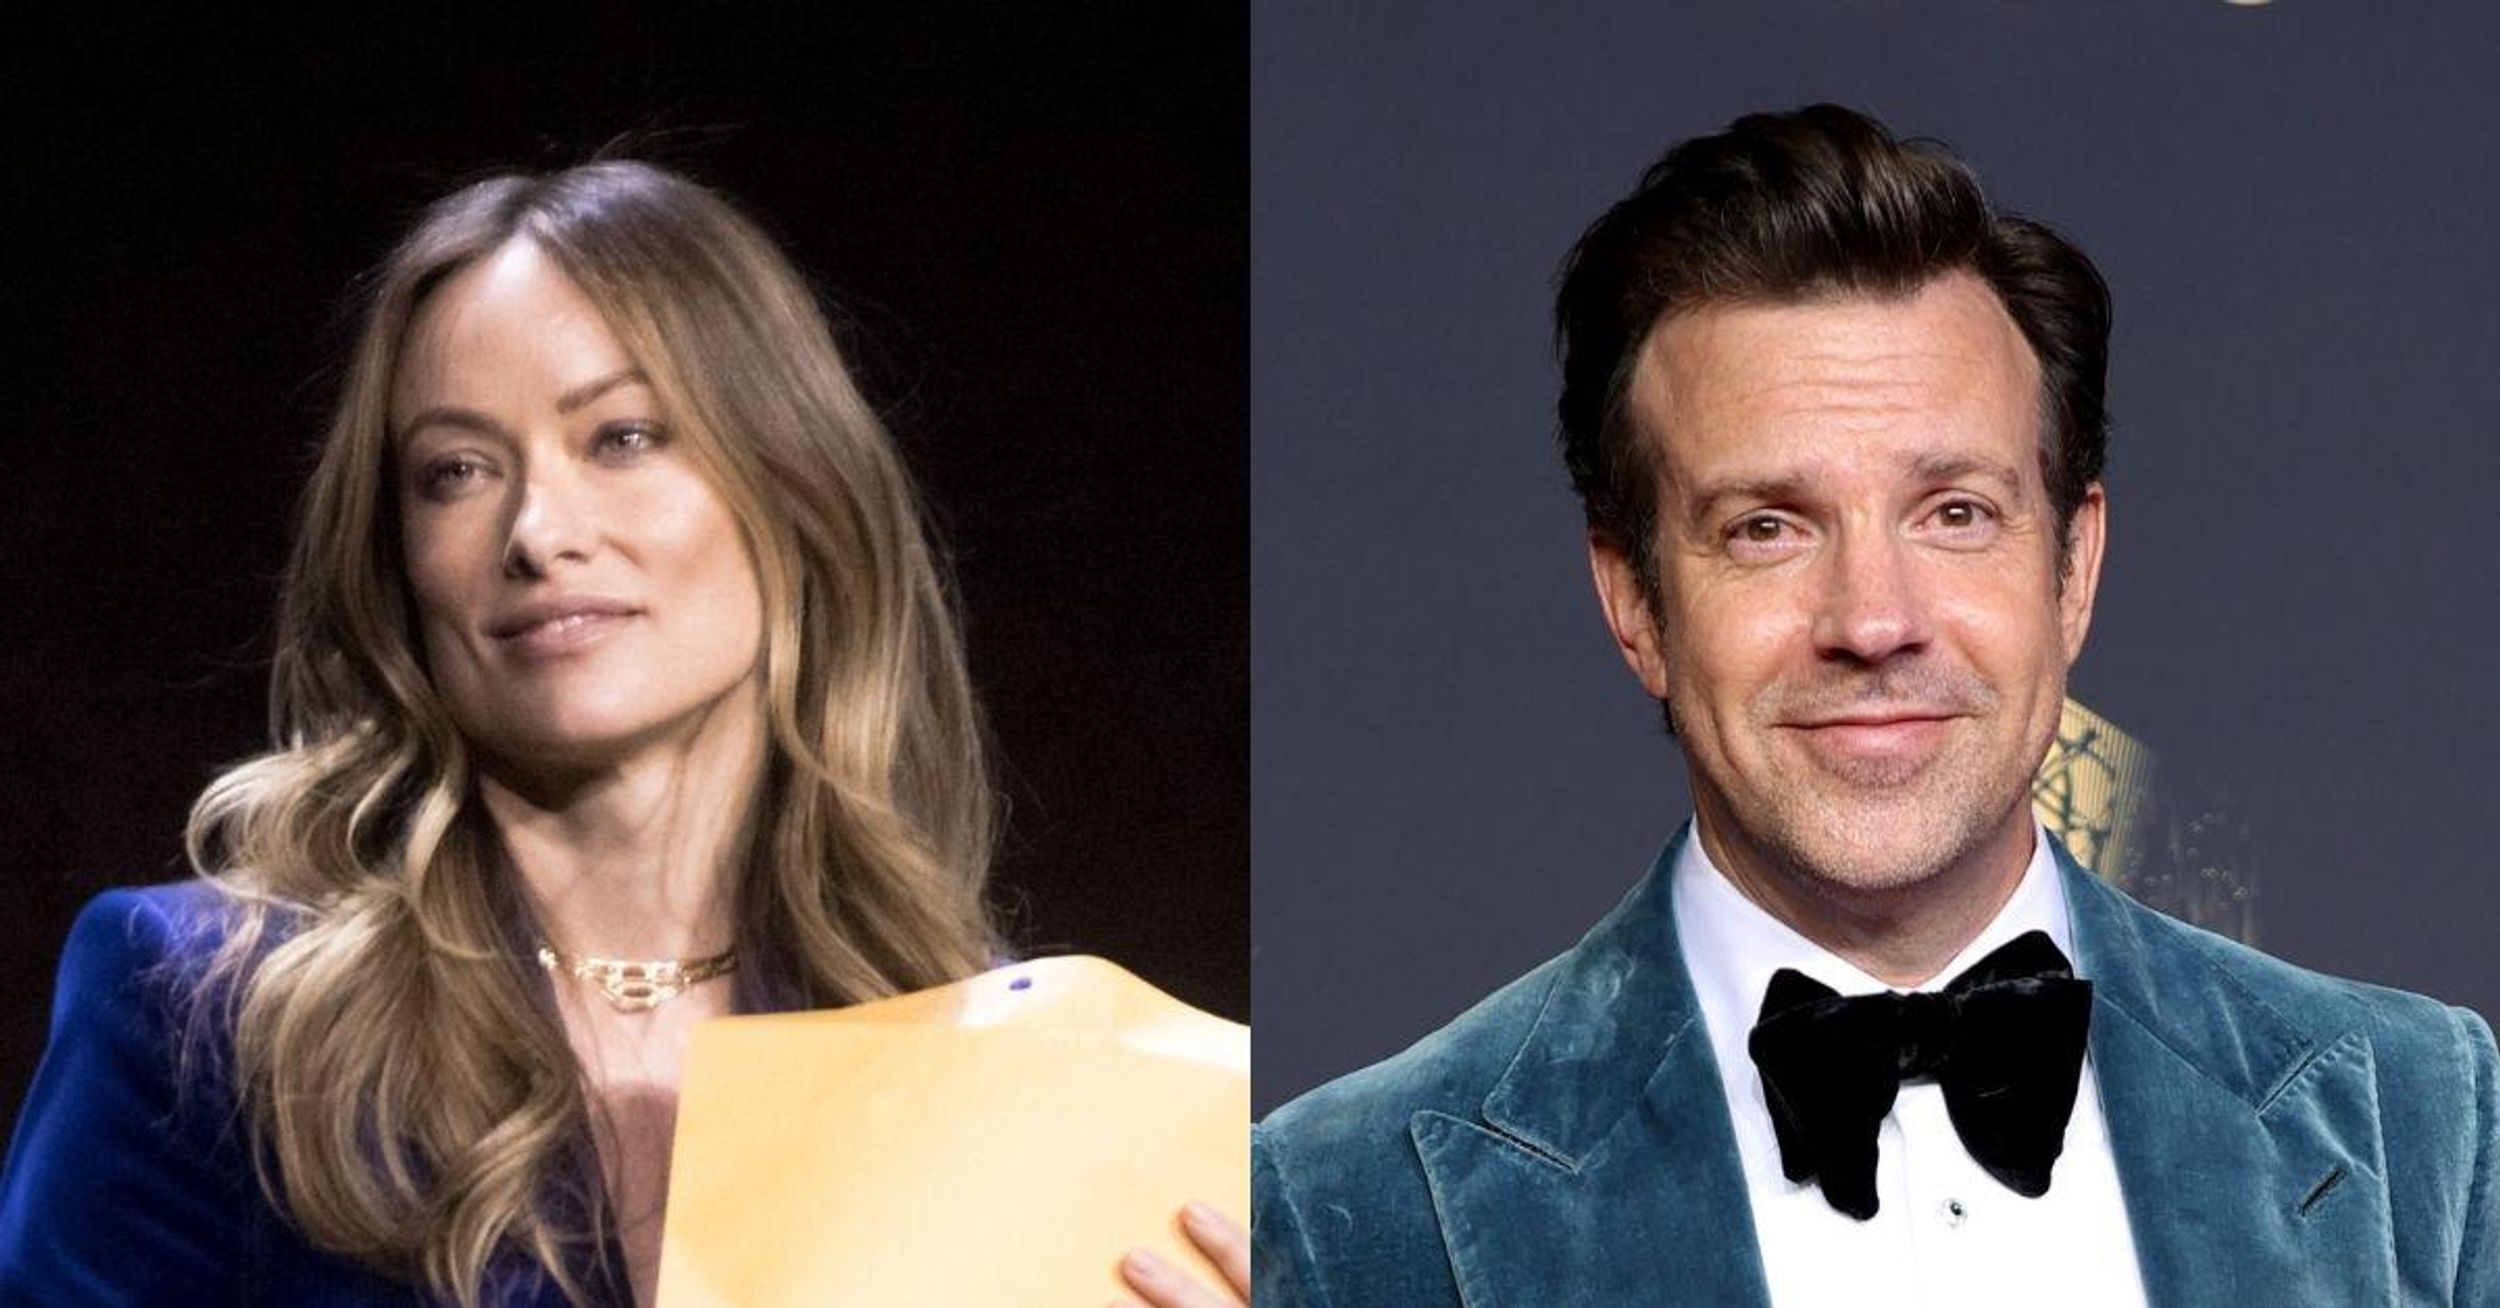 Olivia Wilde Just Got A Mystery Envelope While On Stage—It Was Legal Papers From Ex Jason Sudeikis